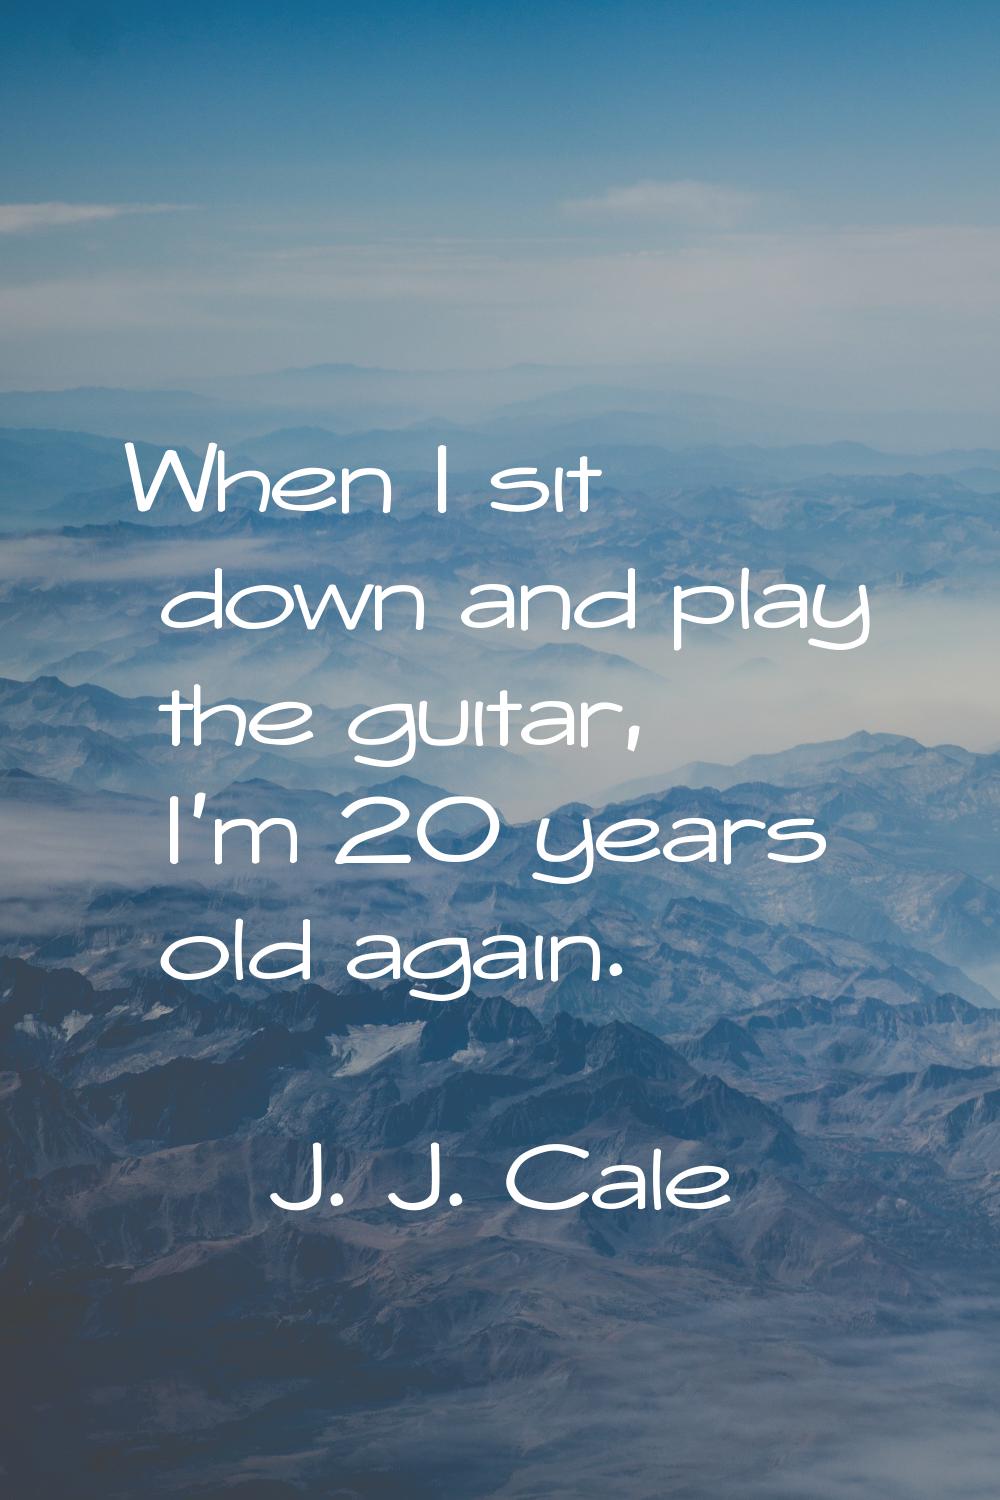 When I sit down and play the guitar, I'm 20 years old again.